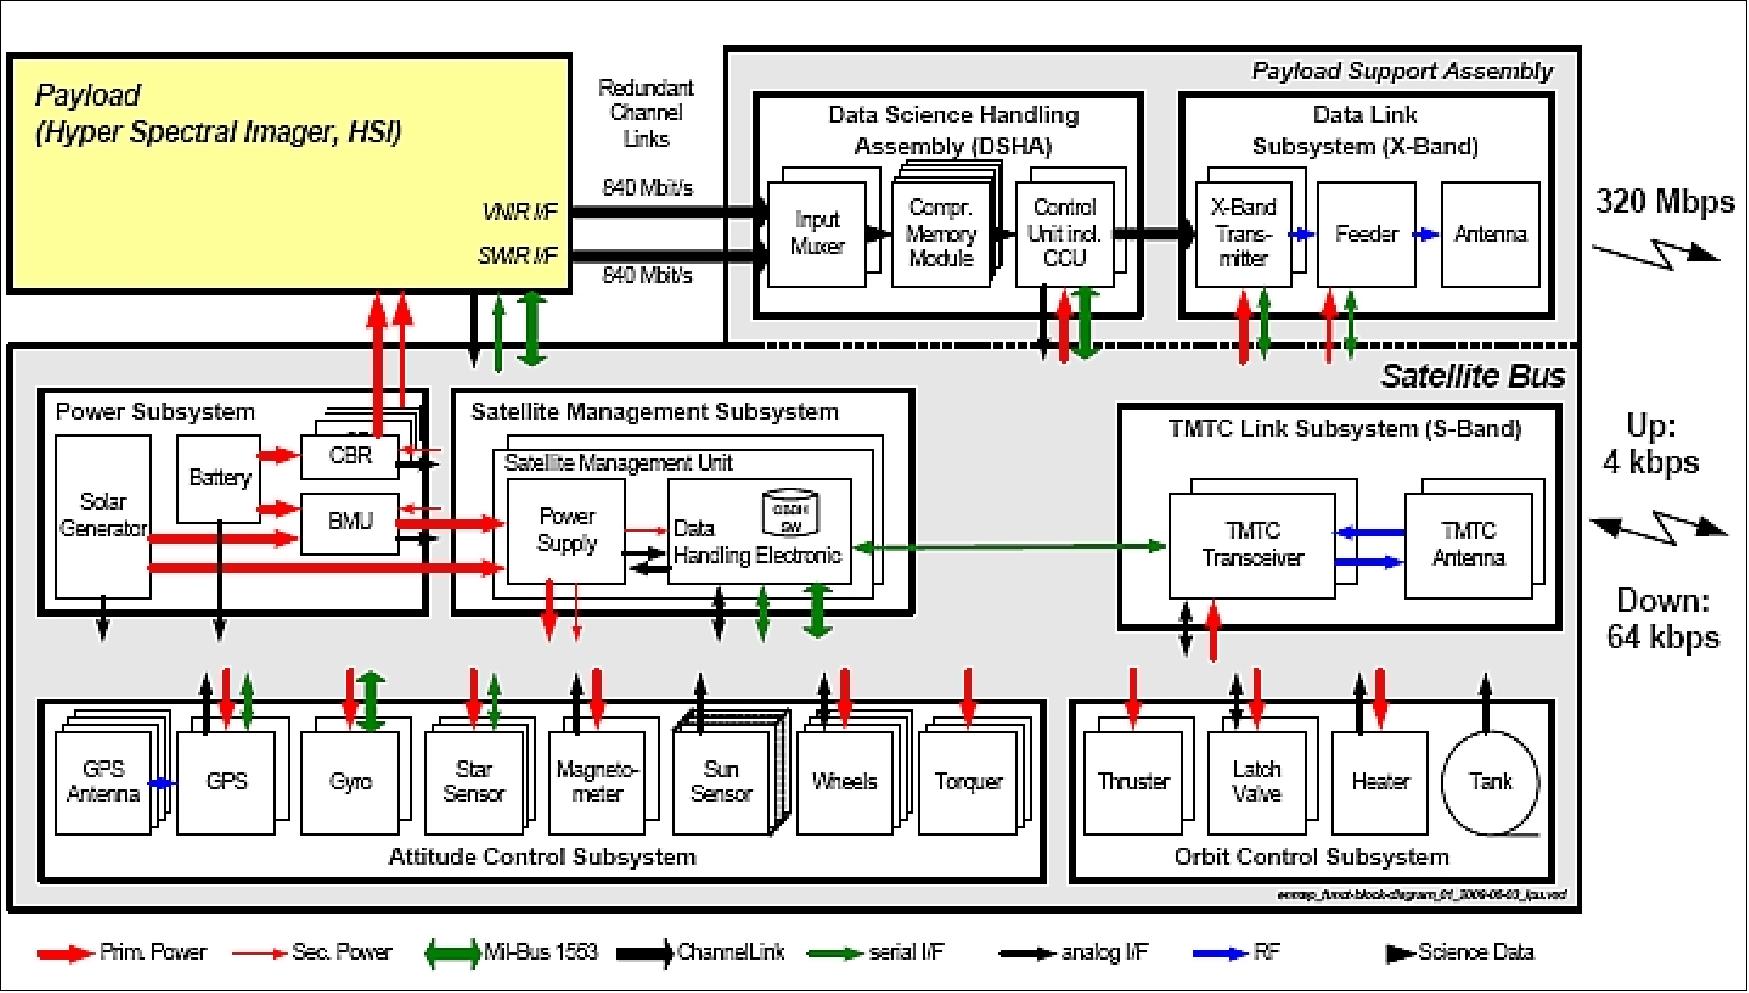 Figure 8: Functional block diagram of the EnMAP satellite bus including bus subsystems (image credit: OHB -System)